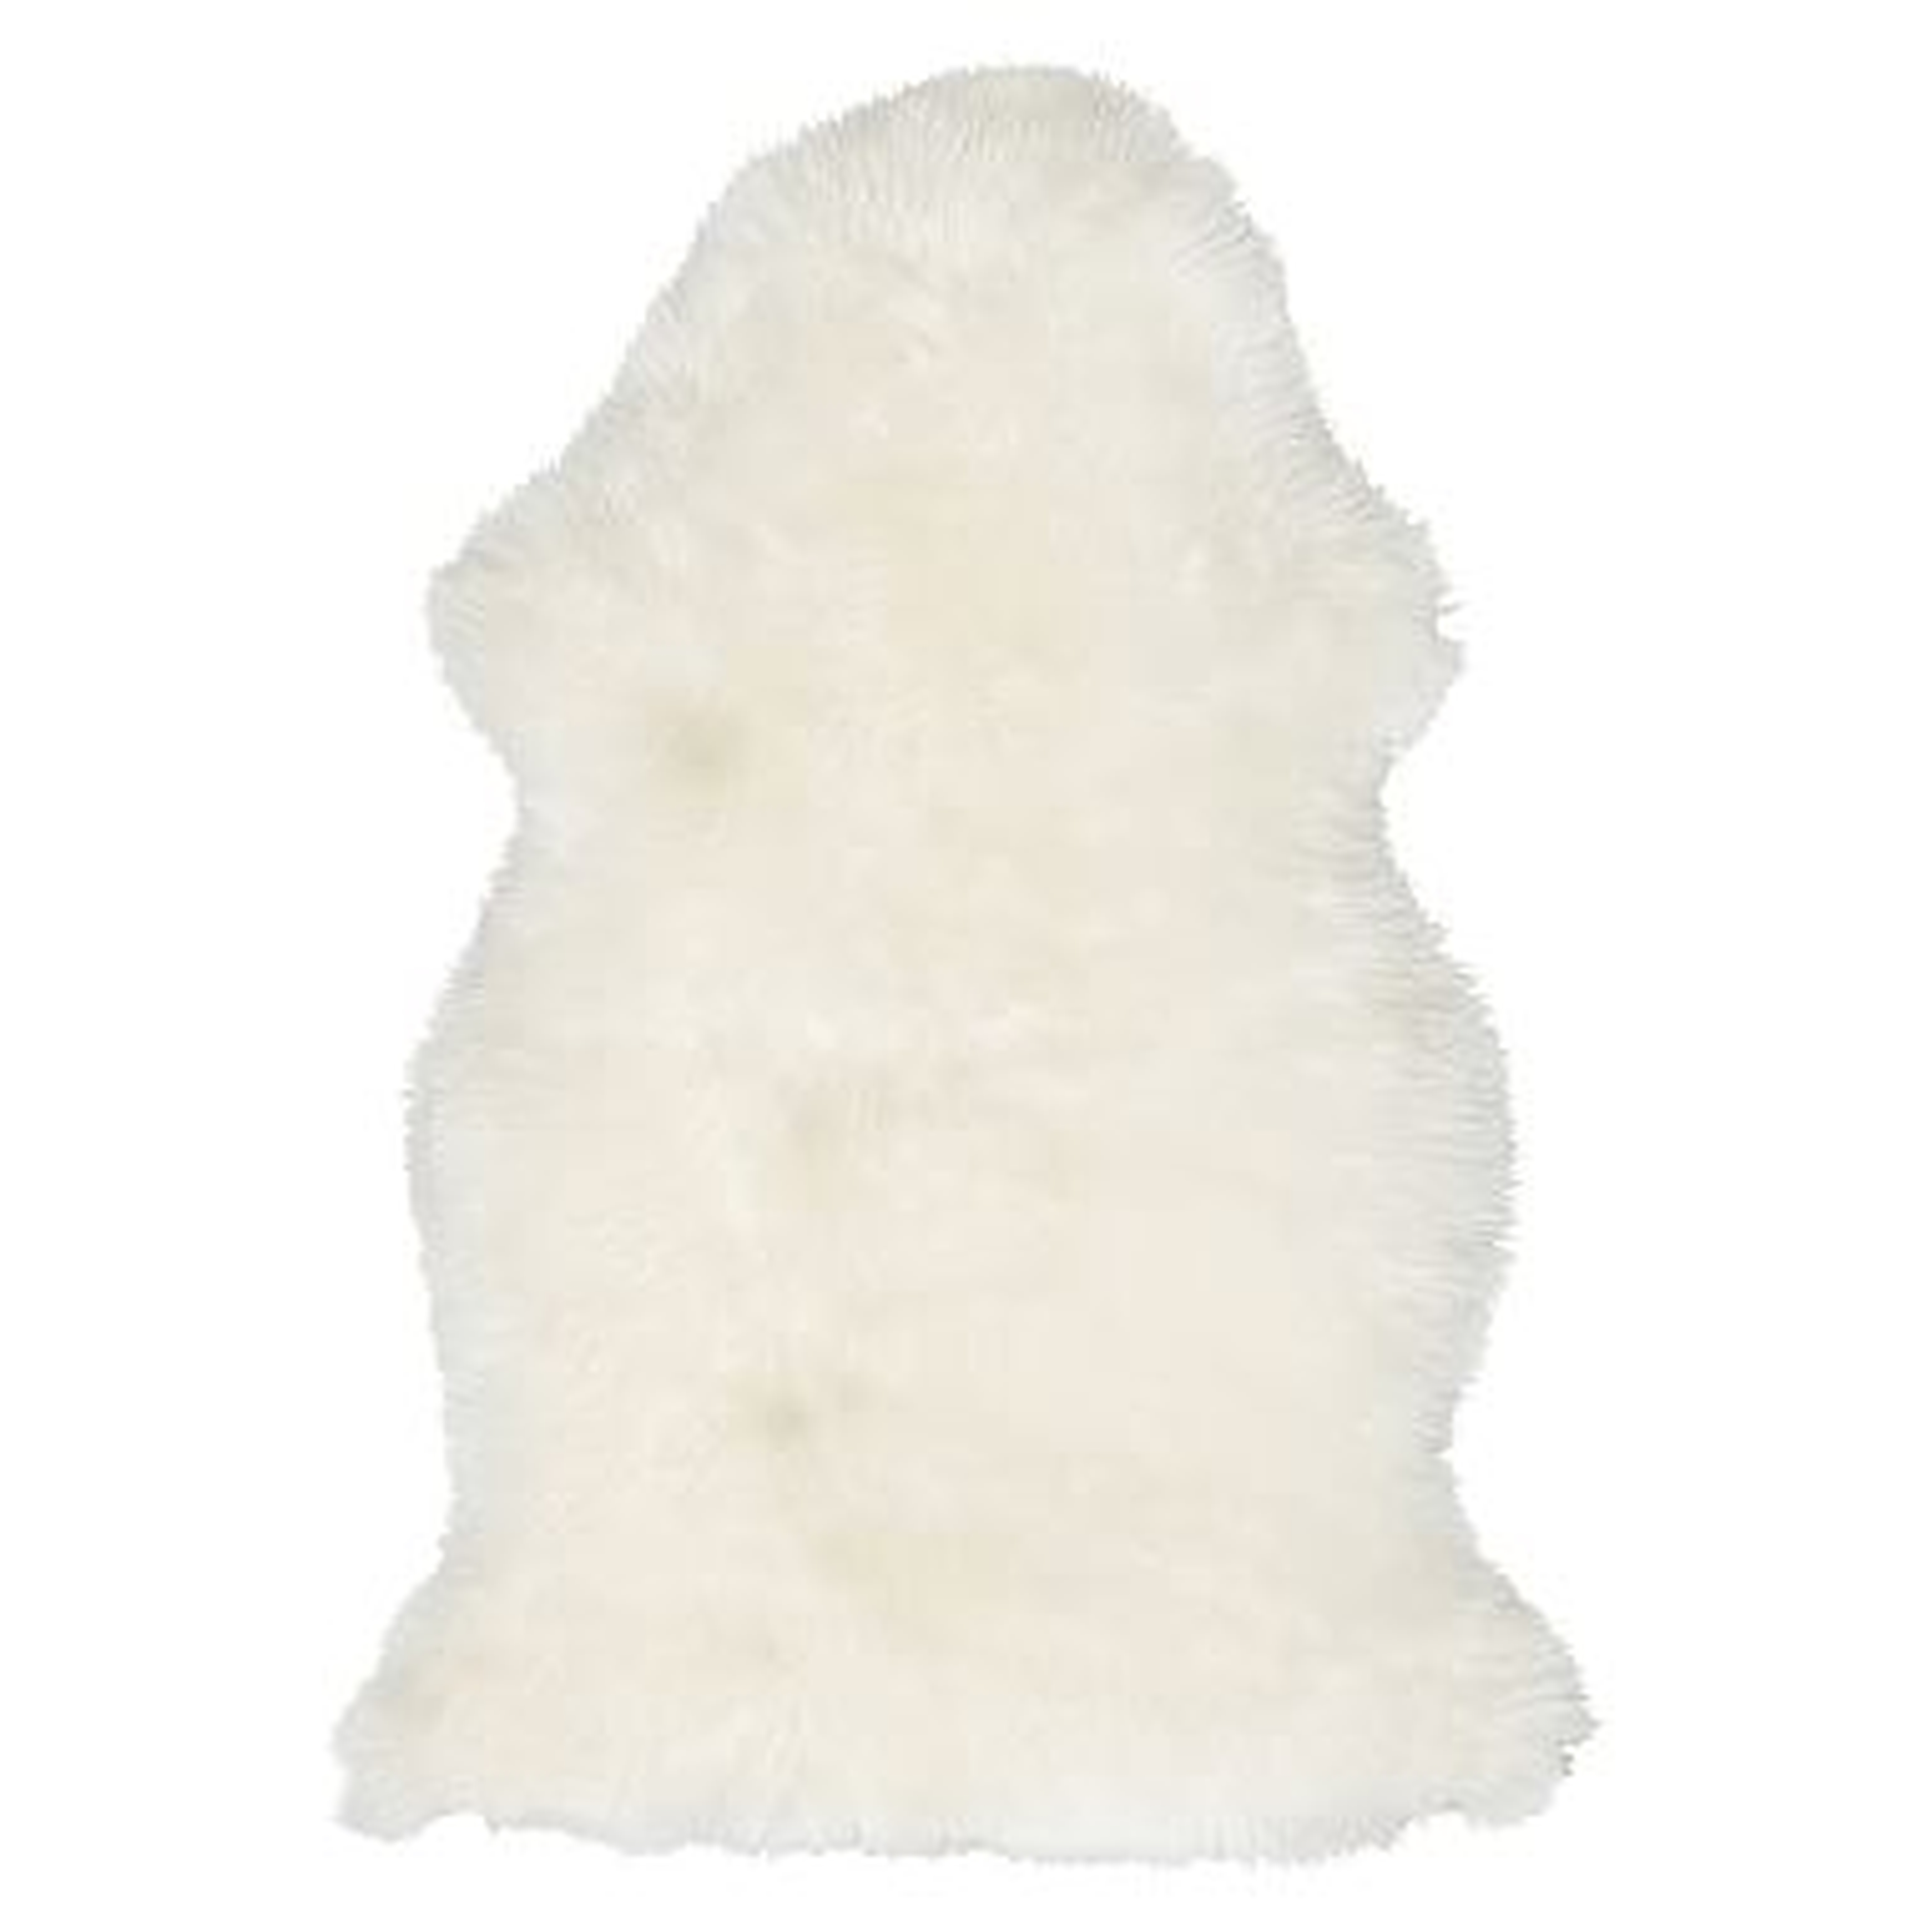 Supersoft Shearling Rug, 2'x3', White - Pottery Barn Teen